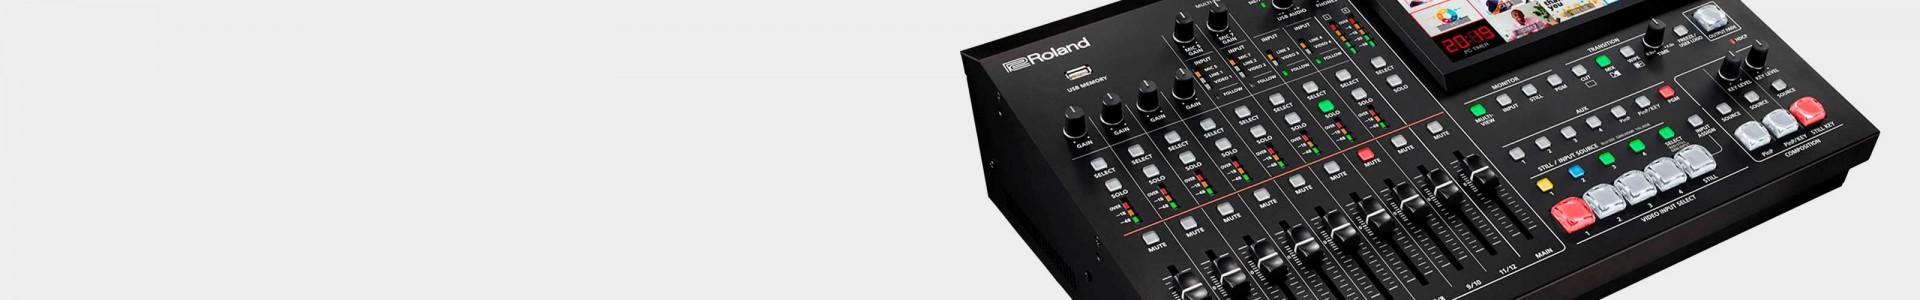 ROLAND - Video Mixers for events - AVACAB